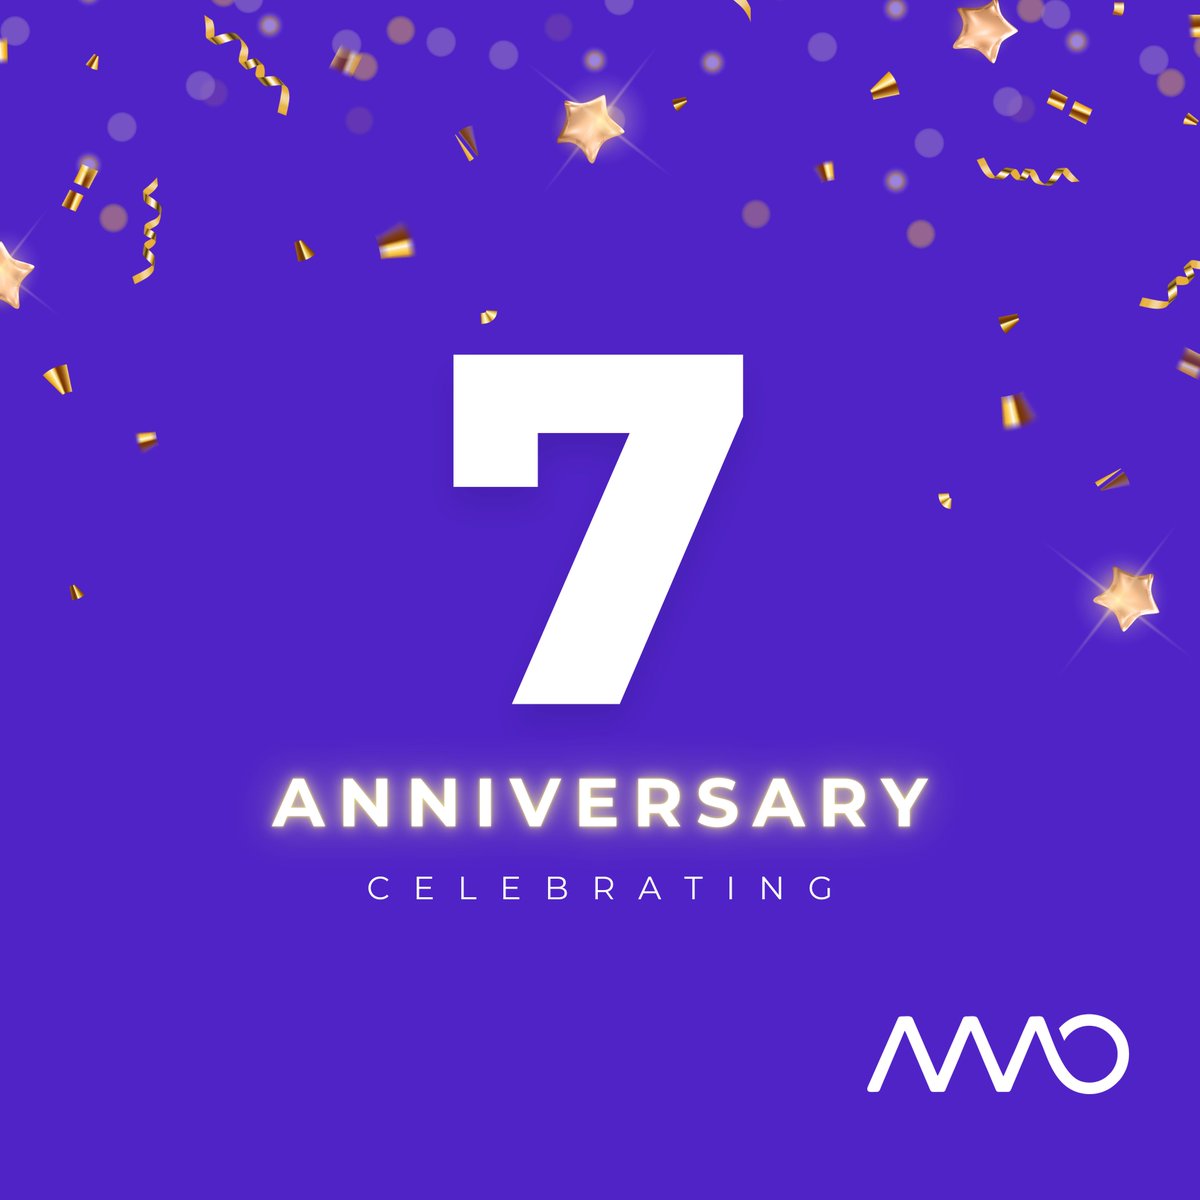 Fun Fact: Did you know that AMO is 7 years young?  Keep an eye on our updates for what's coming next! #ExcitingNews #Innovation #AgileManagement #StayTuned #anniversary